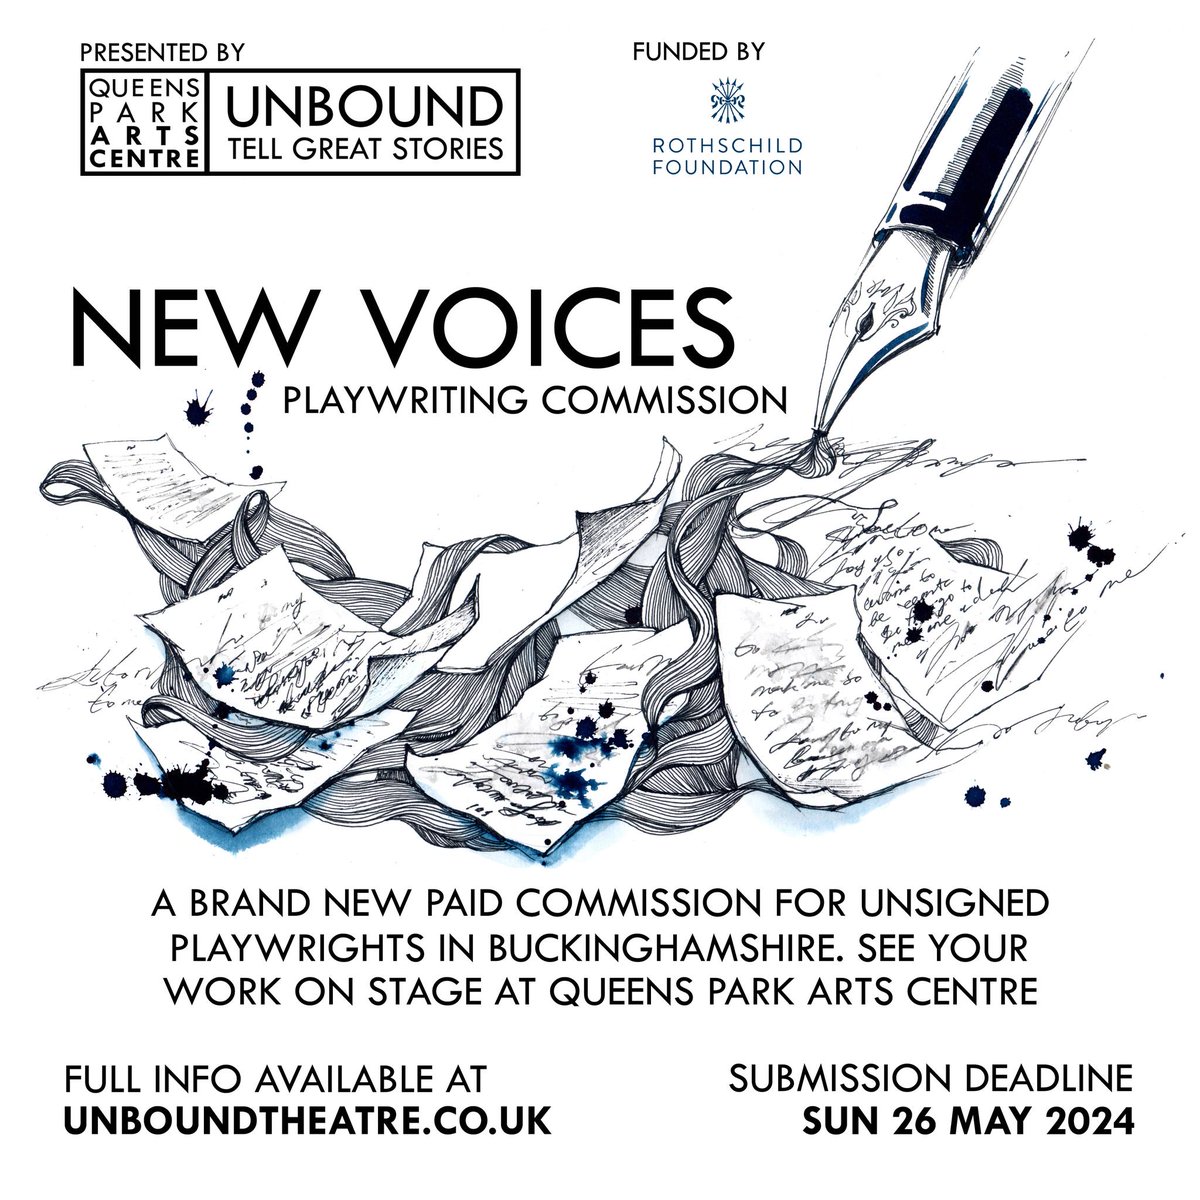 The deadline for our New Voices Writing Commission is fast approaching. If you're based in Bucks and want to write for the stage, here's your chance to win a paid commission!

Full info here: unboundtheatre.co.uk/new-voices-com…

#TellGreatStories